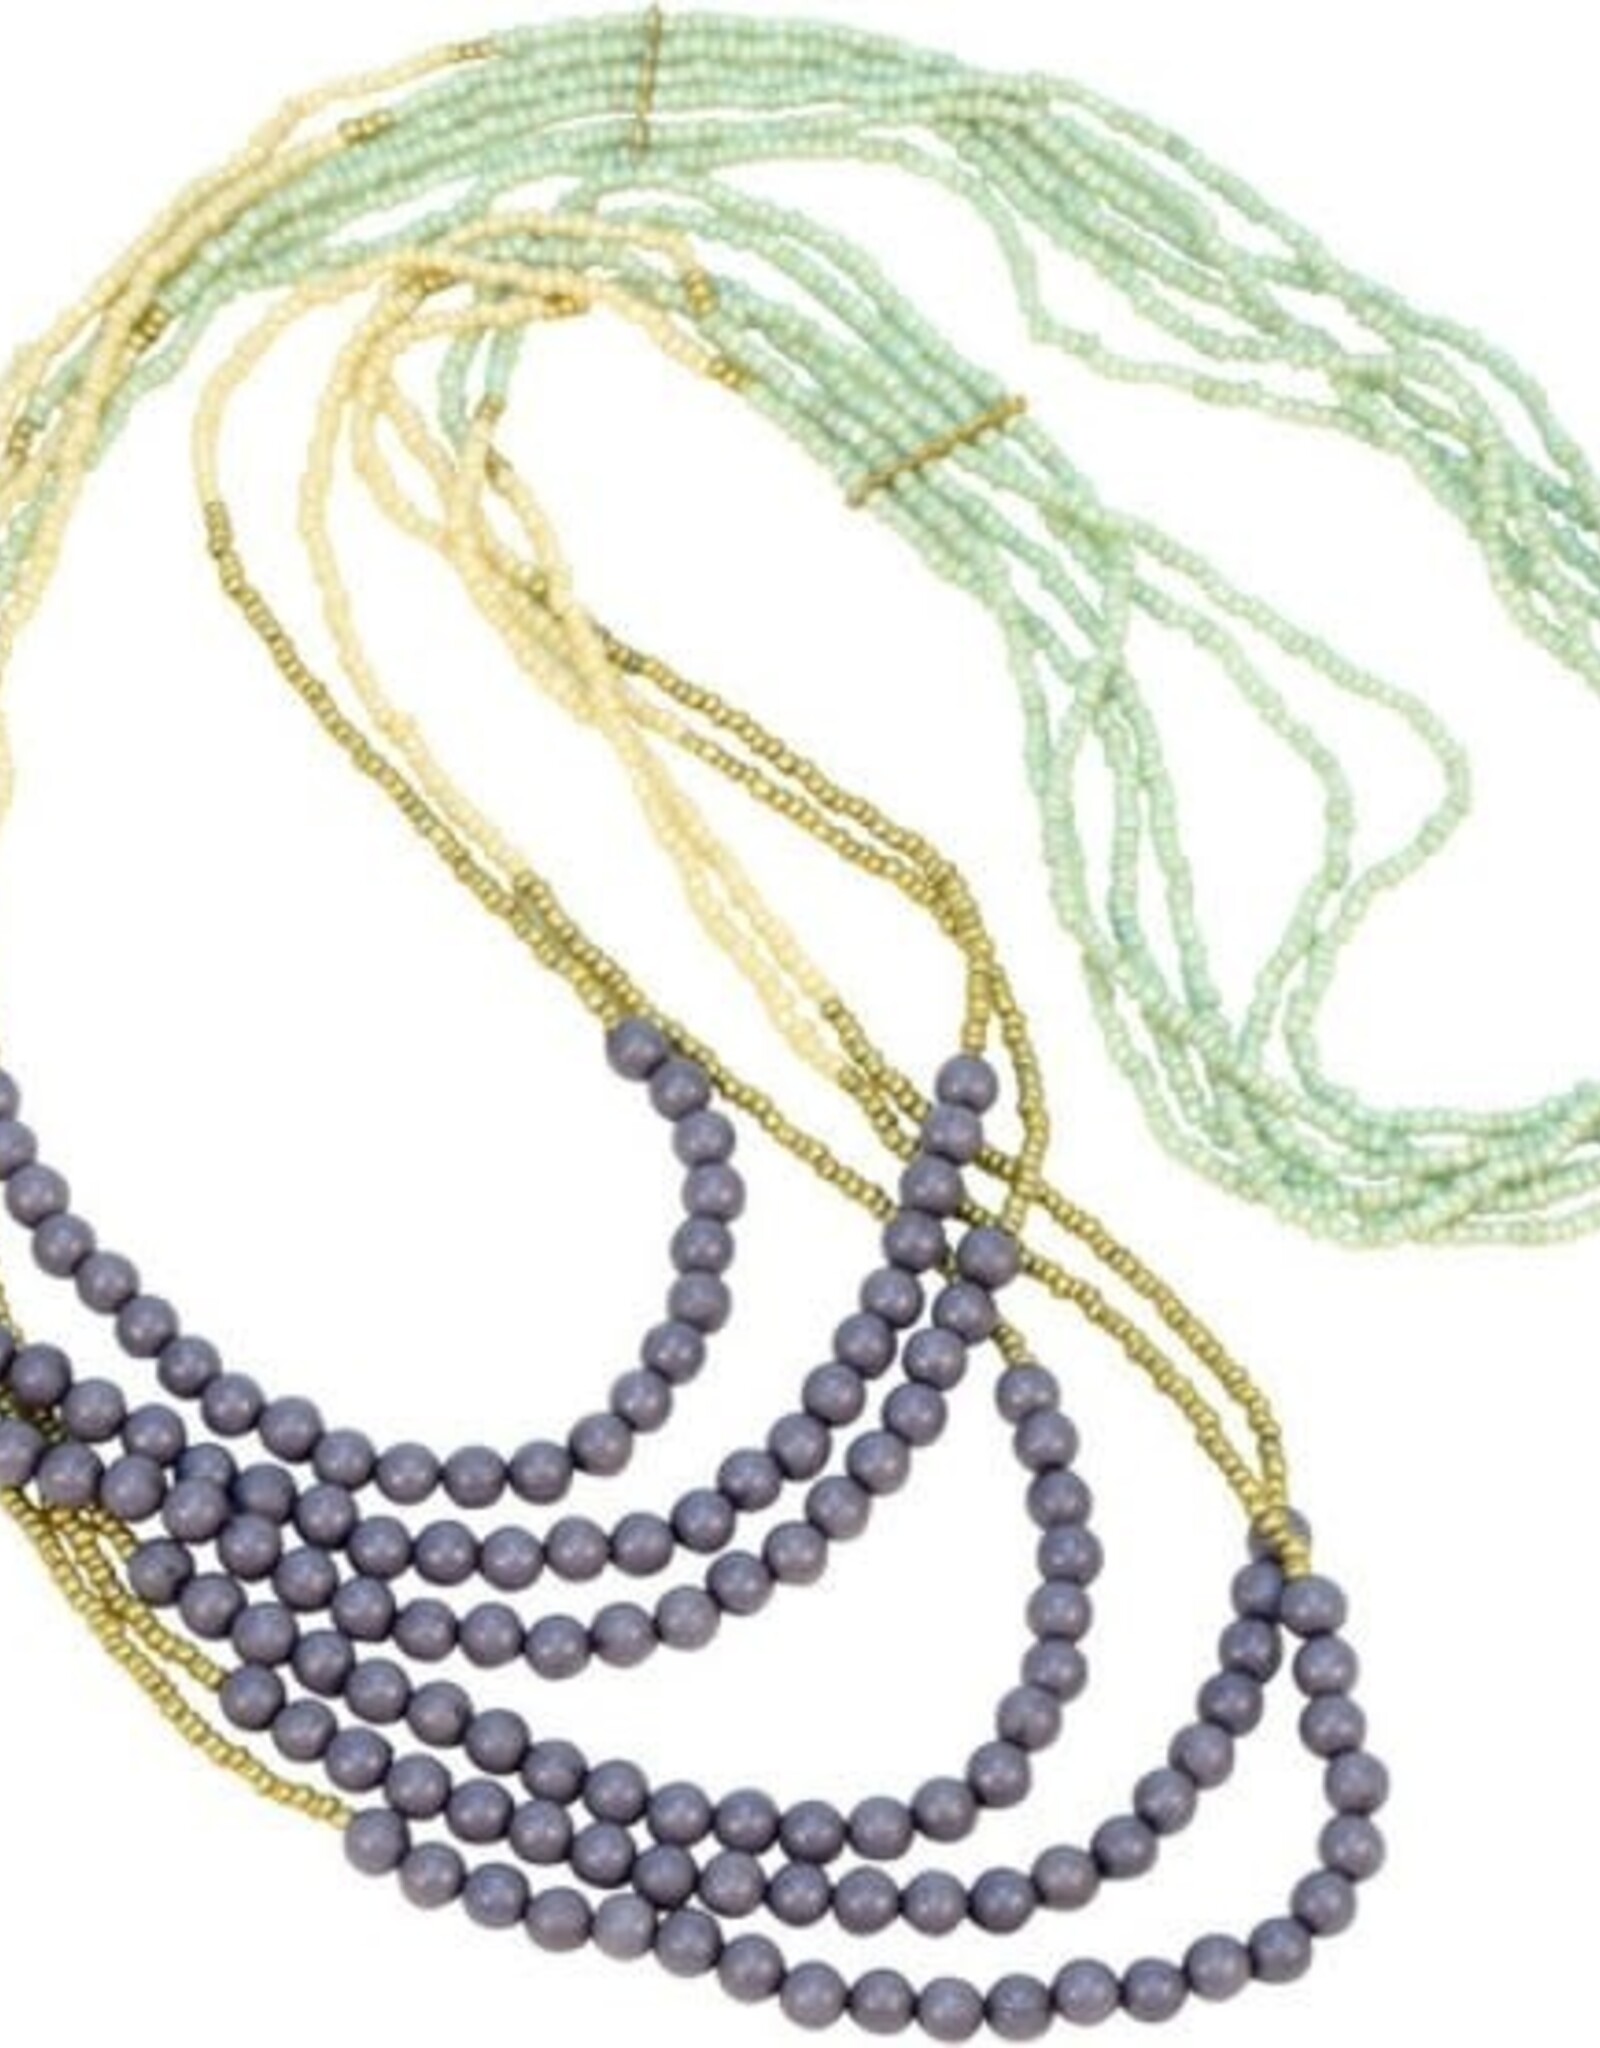 Ten Thousand Villages Canada Shades of Pastels Multi-Strand Necklace